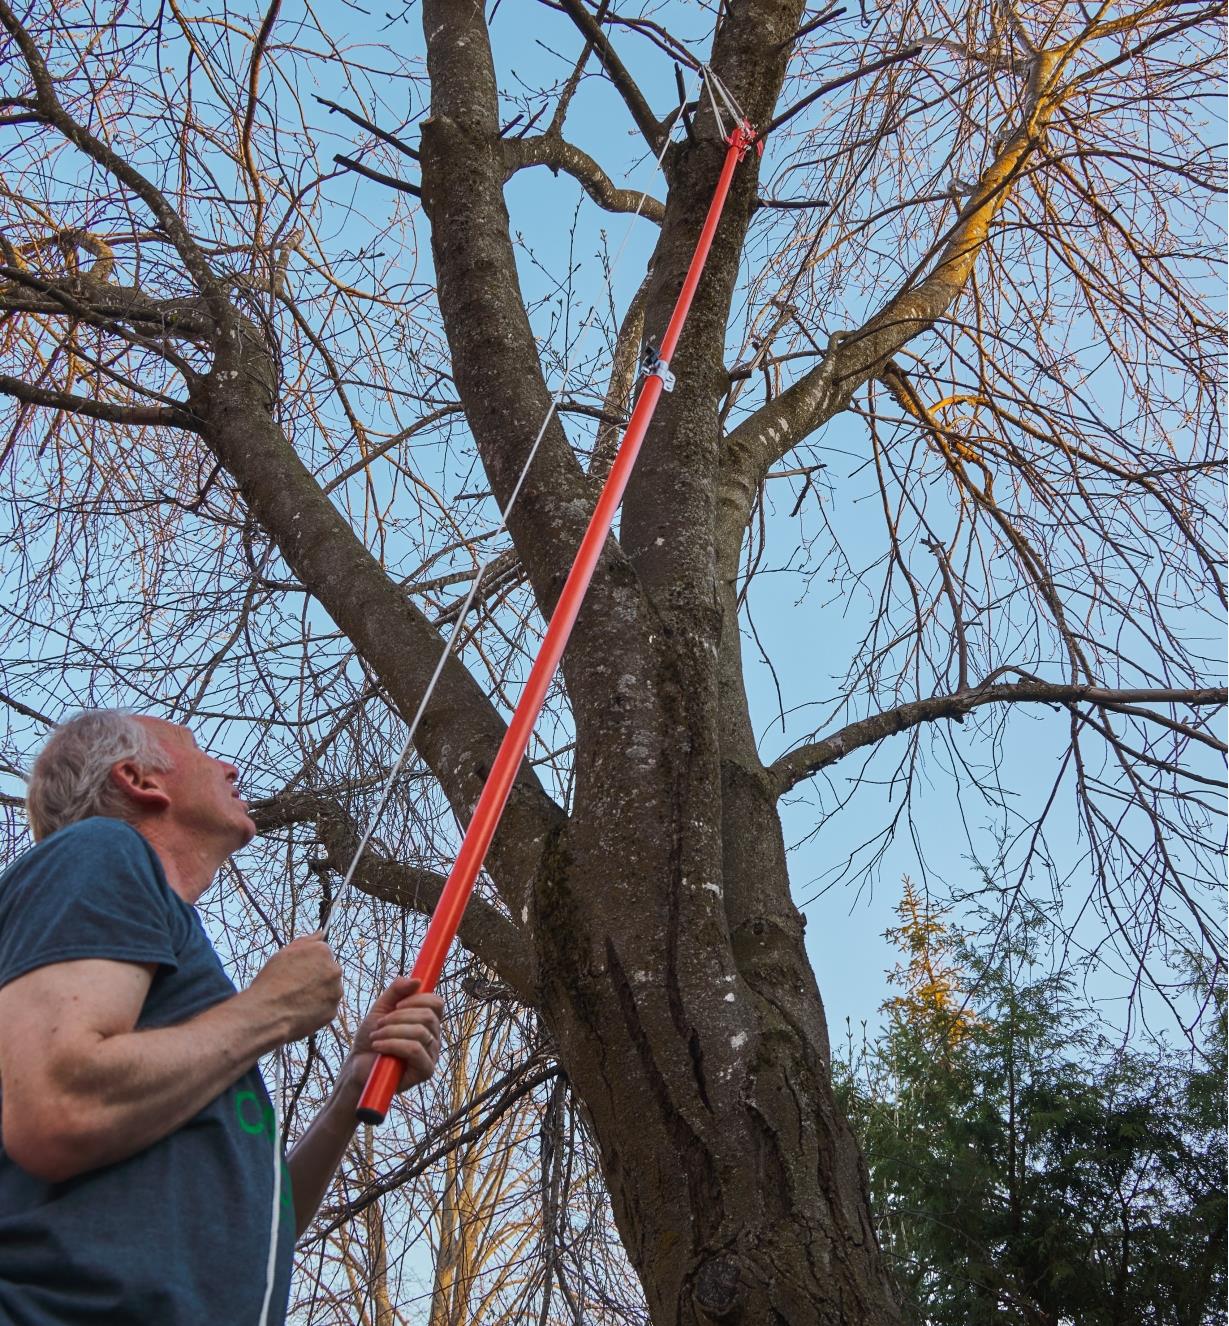 Using the extended pole, pruner head and pulley of the pole pruning set to cut dead tree branches